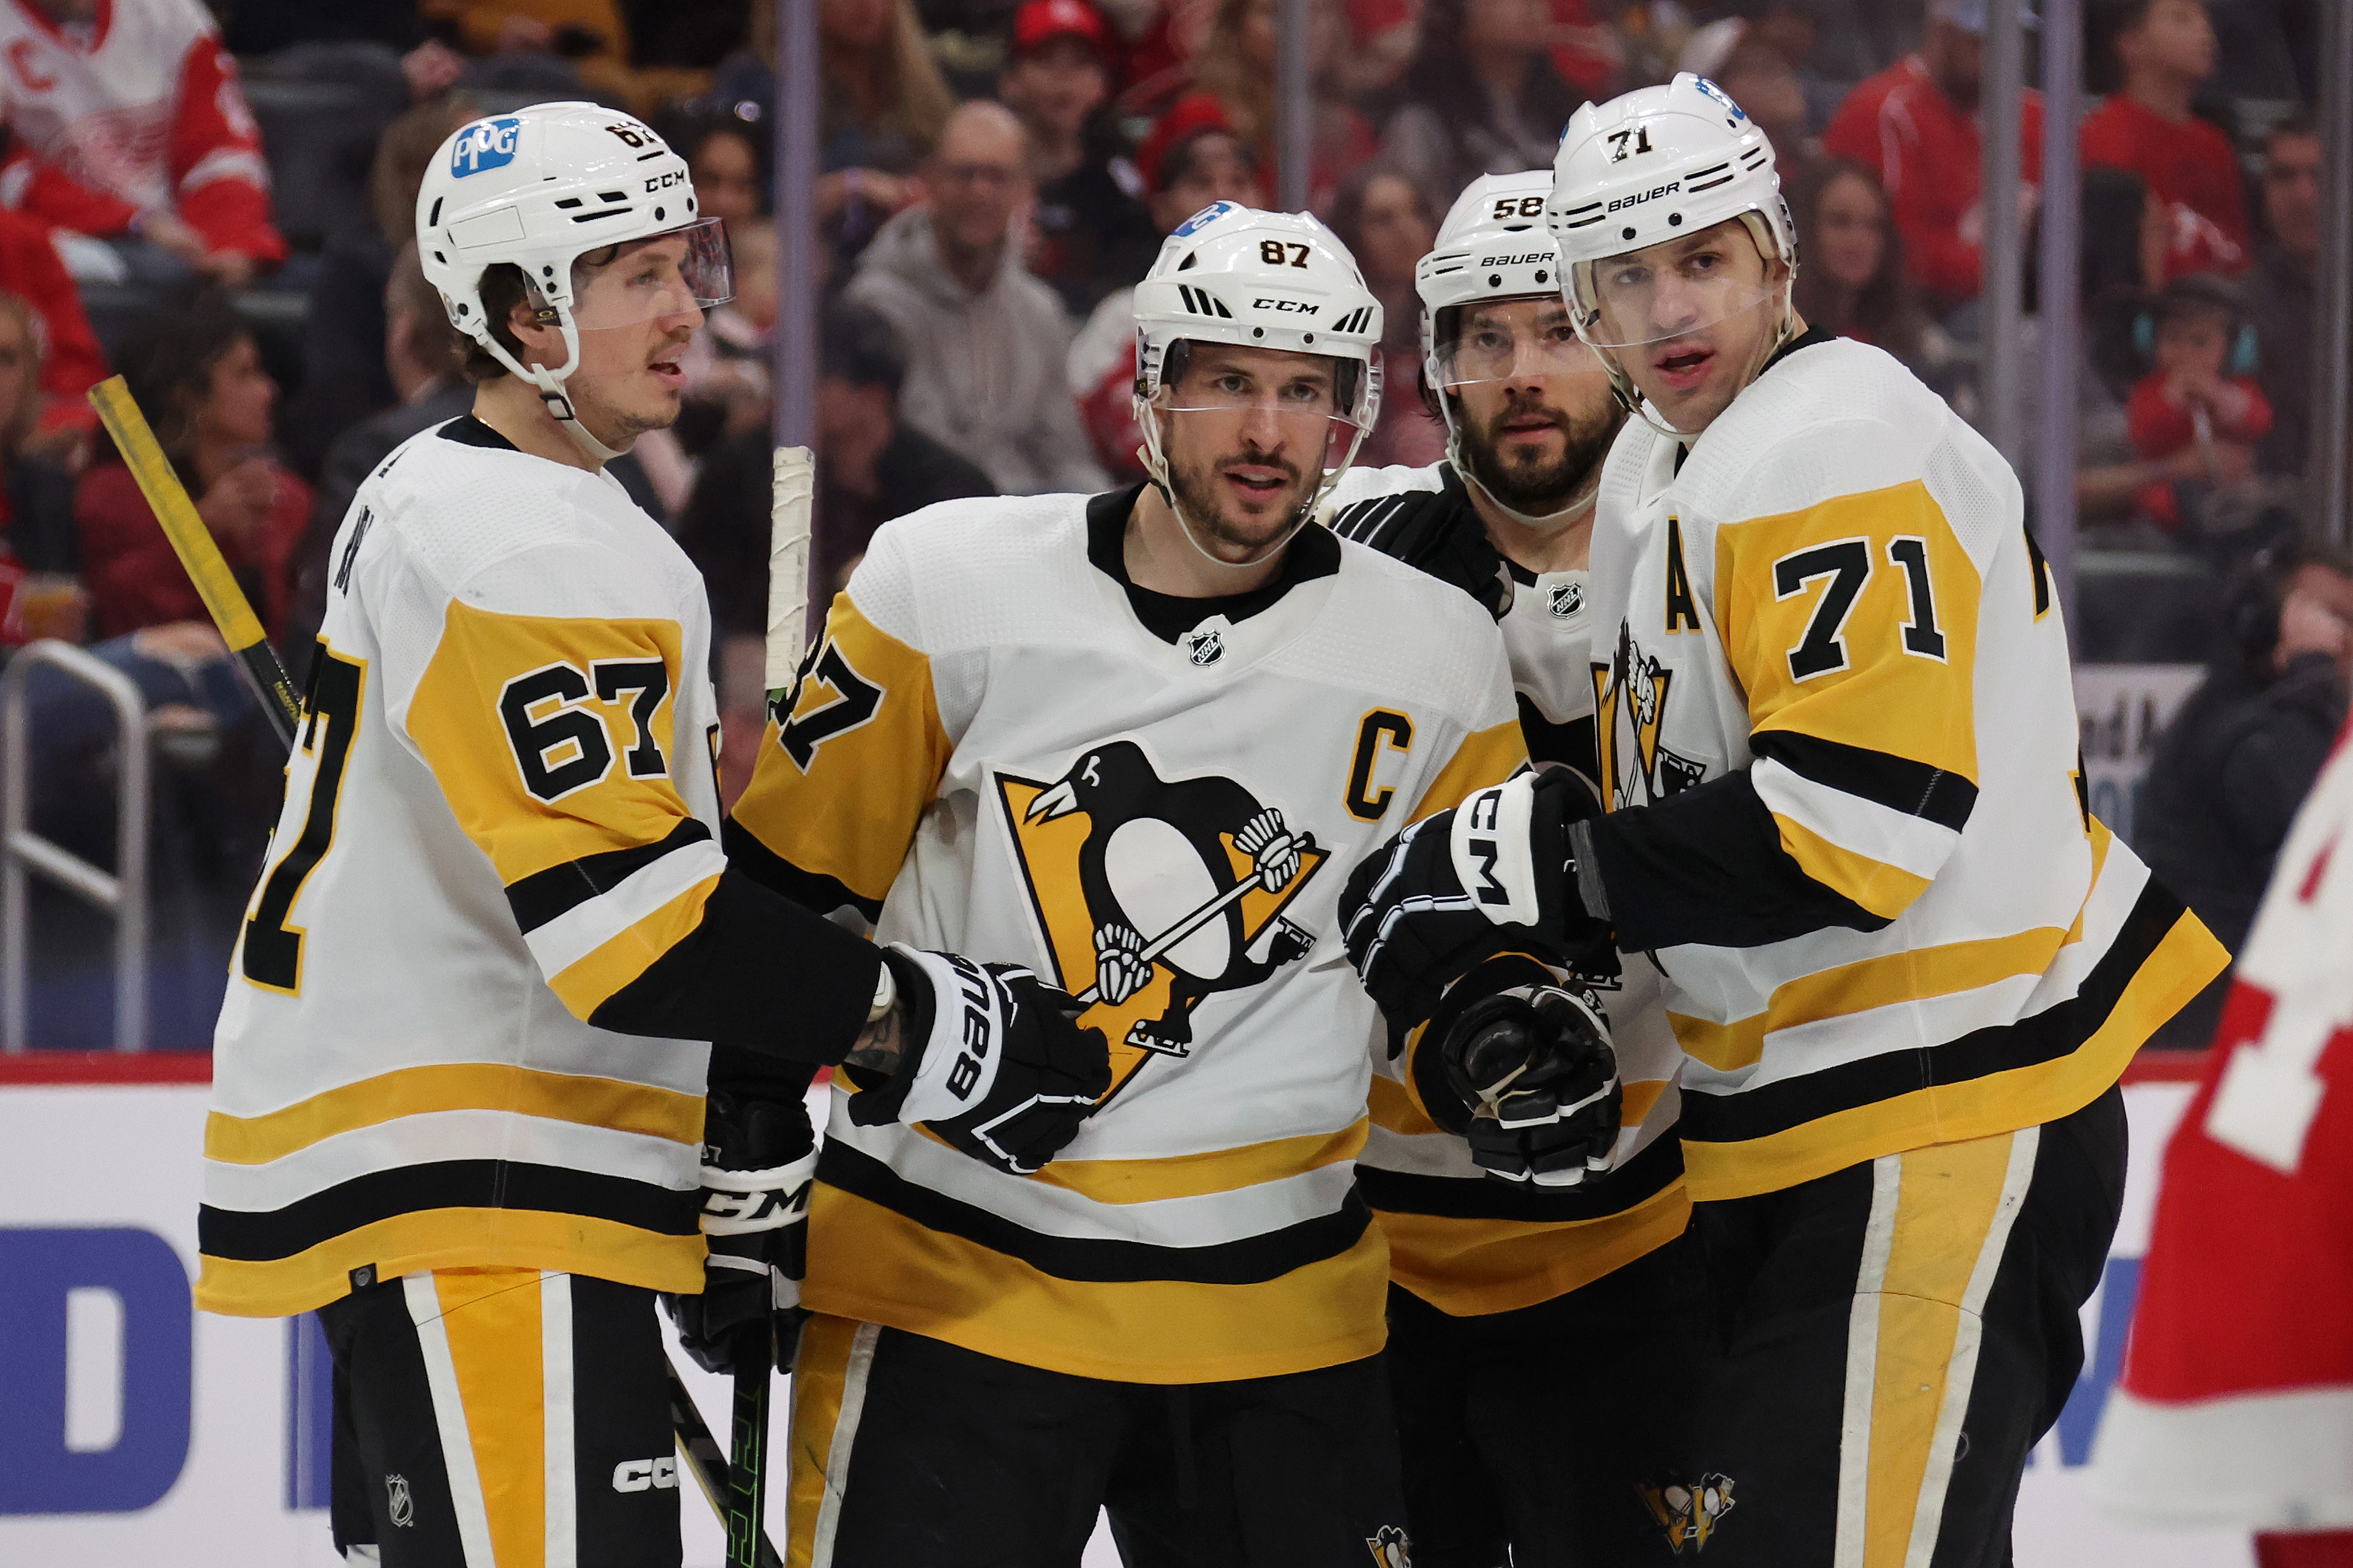 Sidney Crosby, entering his 19th season with Penguins, is ready to